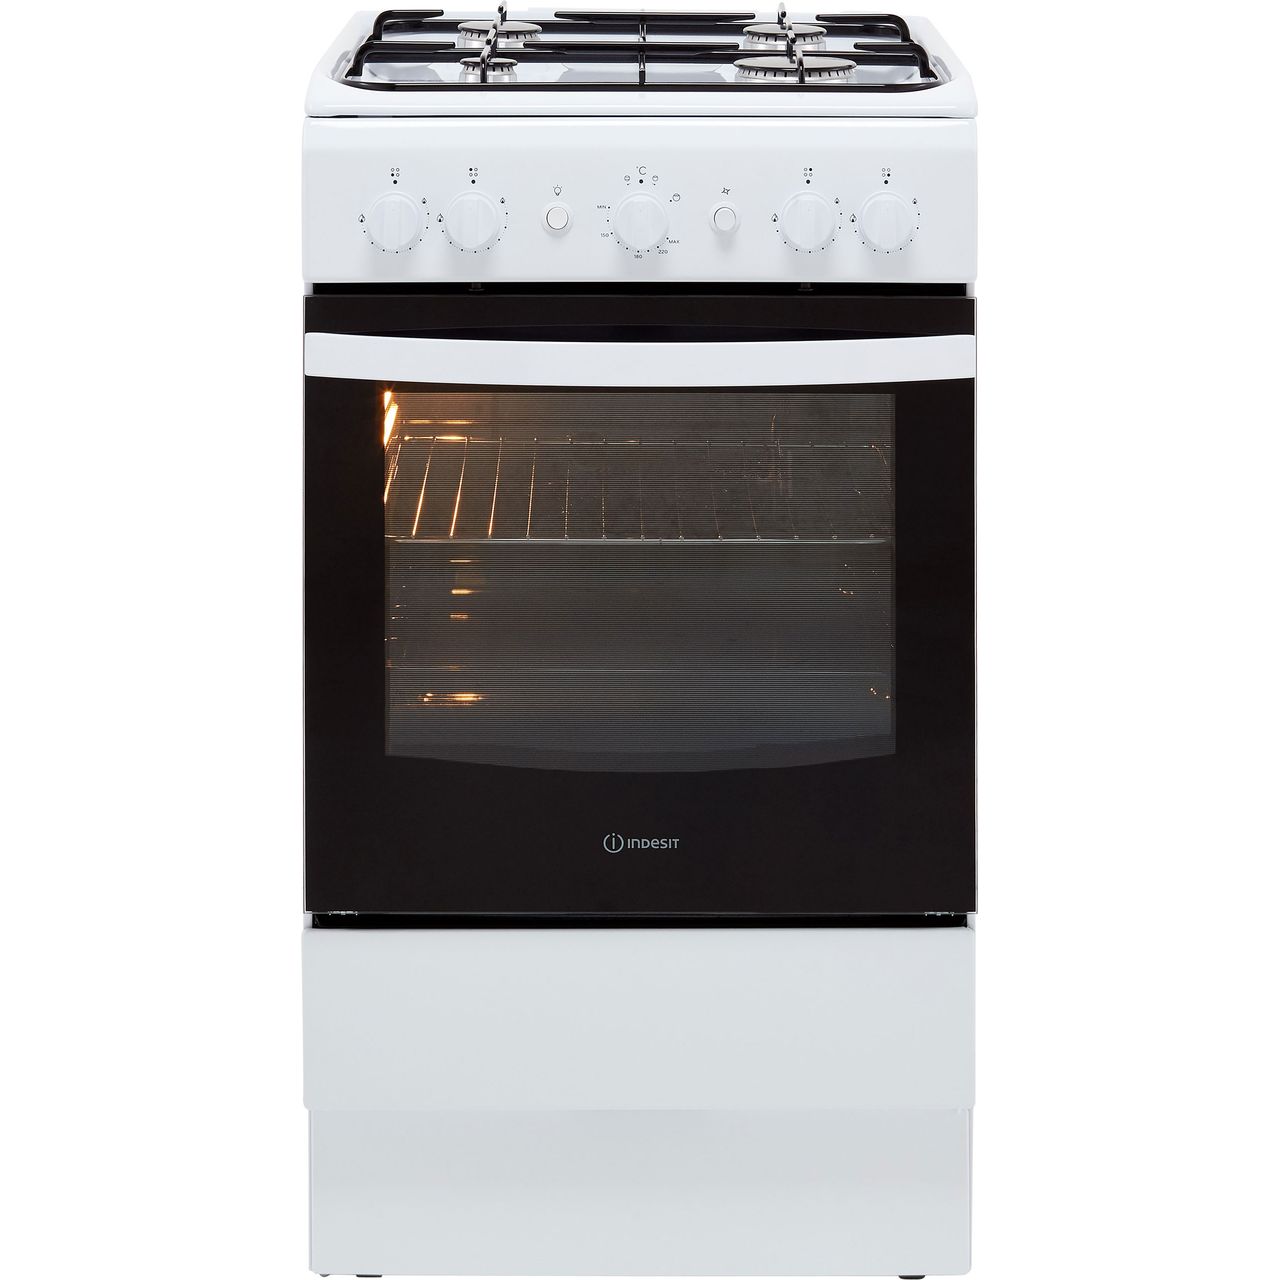 Indesit Cloe IS5G1KMW 50cm Gas Cooker Review